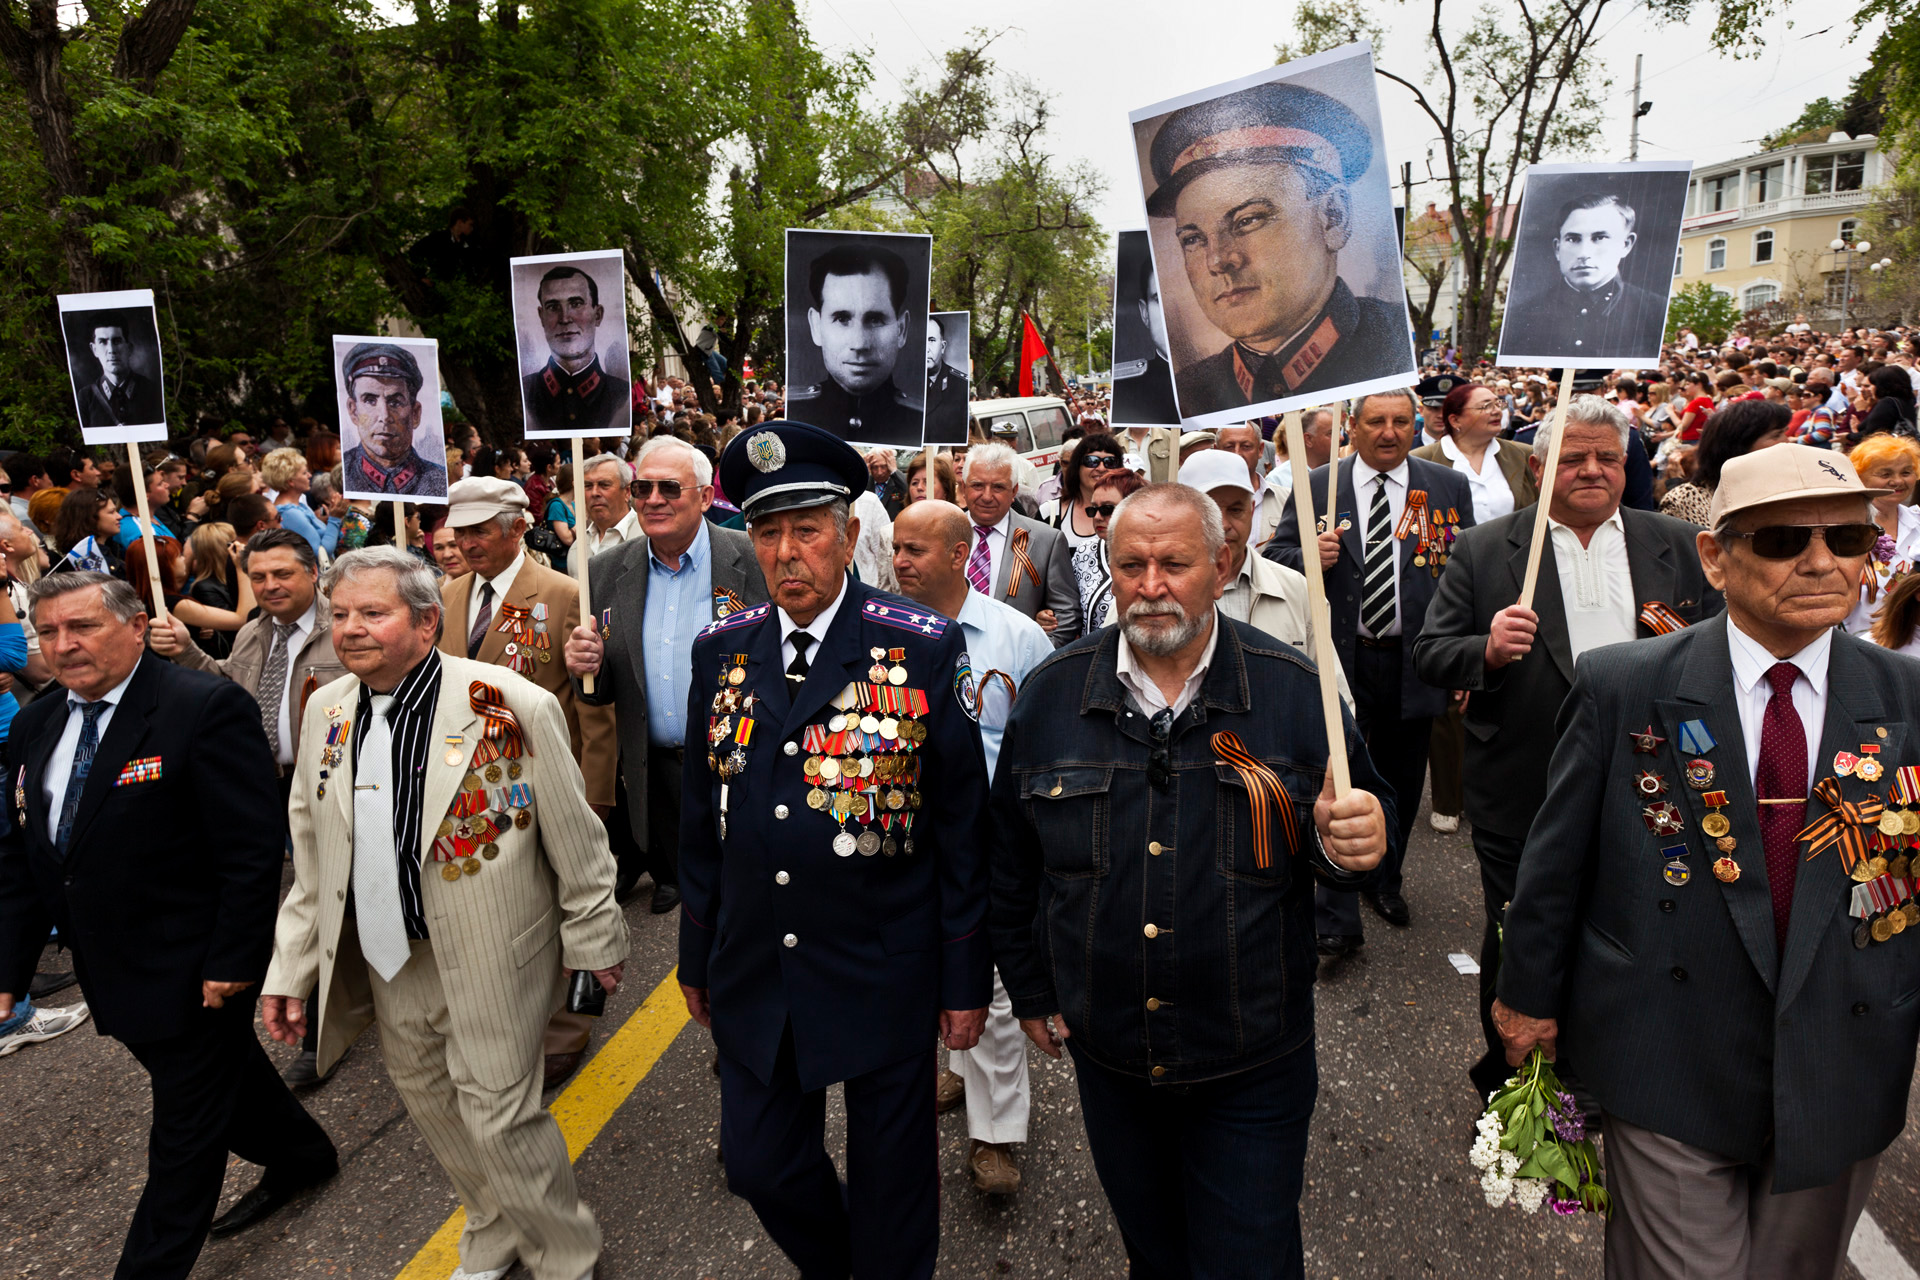  In Sevastopol, Russian and Ukrainian veterans march proudly together to celebrate the annual Victory Day festivities. The persistence of memory is on parade on May 9 when Russian and Ukrainian troops, citizens, and veterans of the Soviet Army honor 